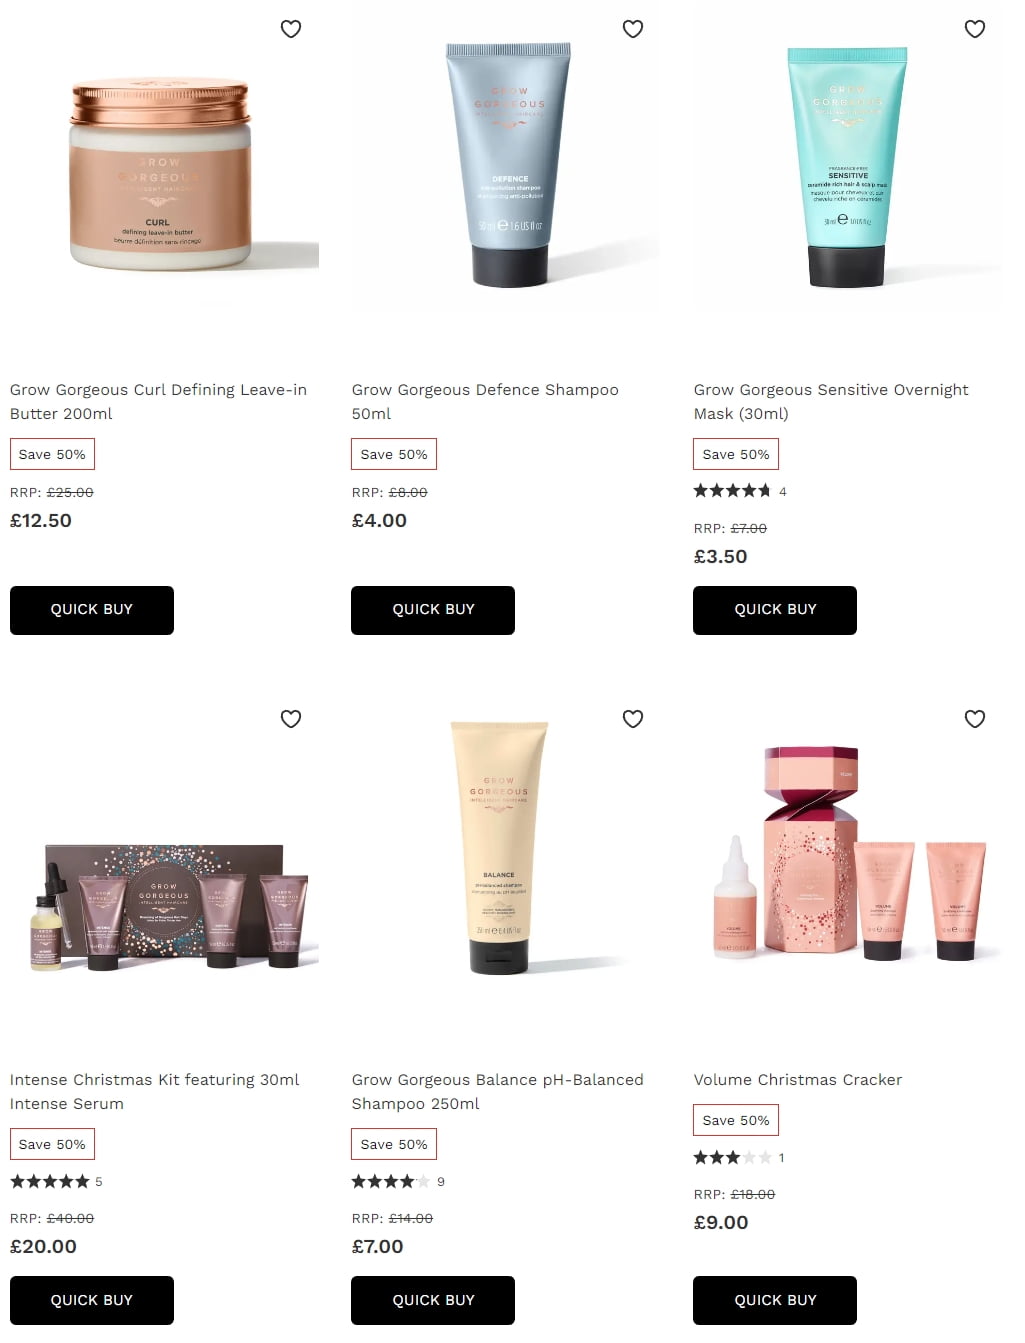 Up to 50% off Grow Gorgeous at Lookfantastic